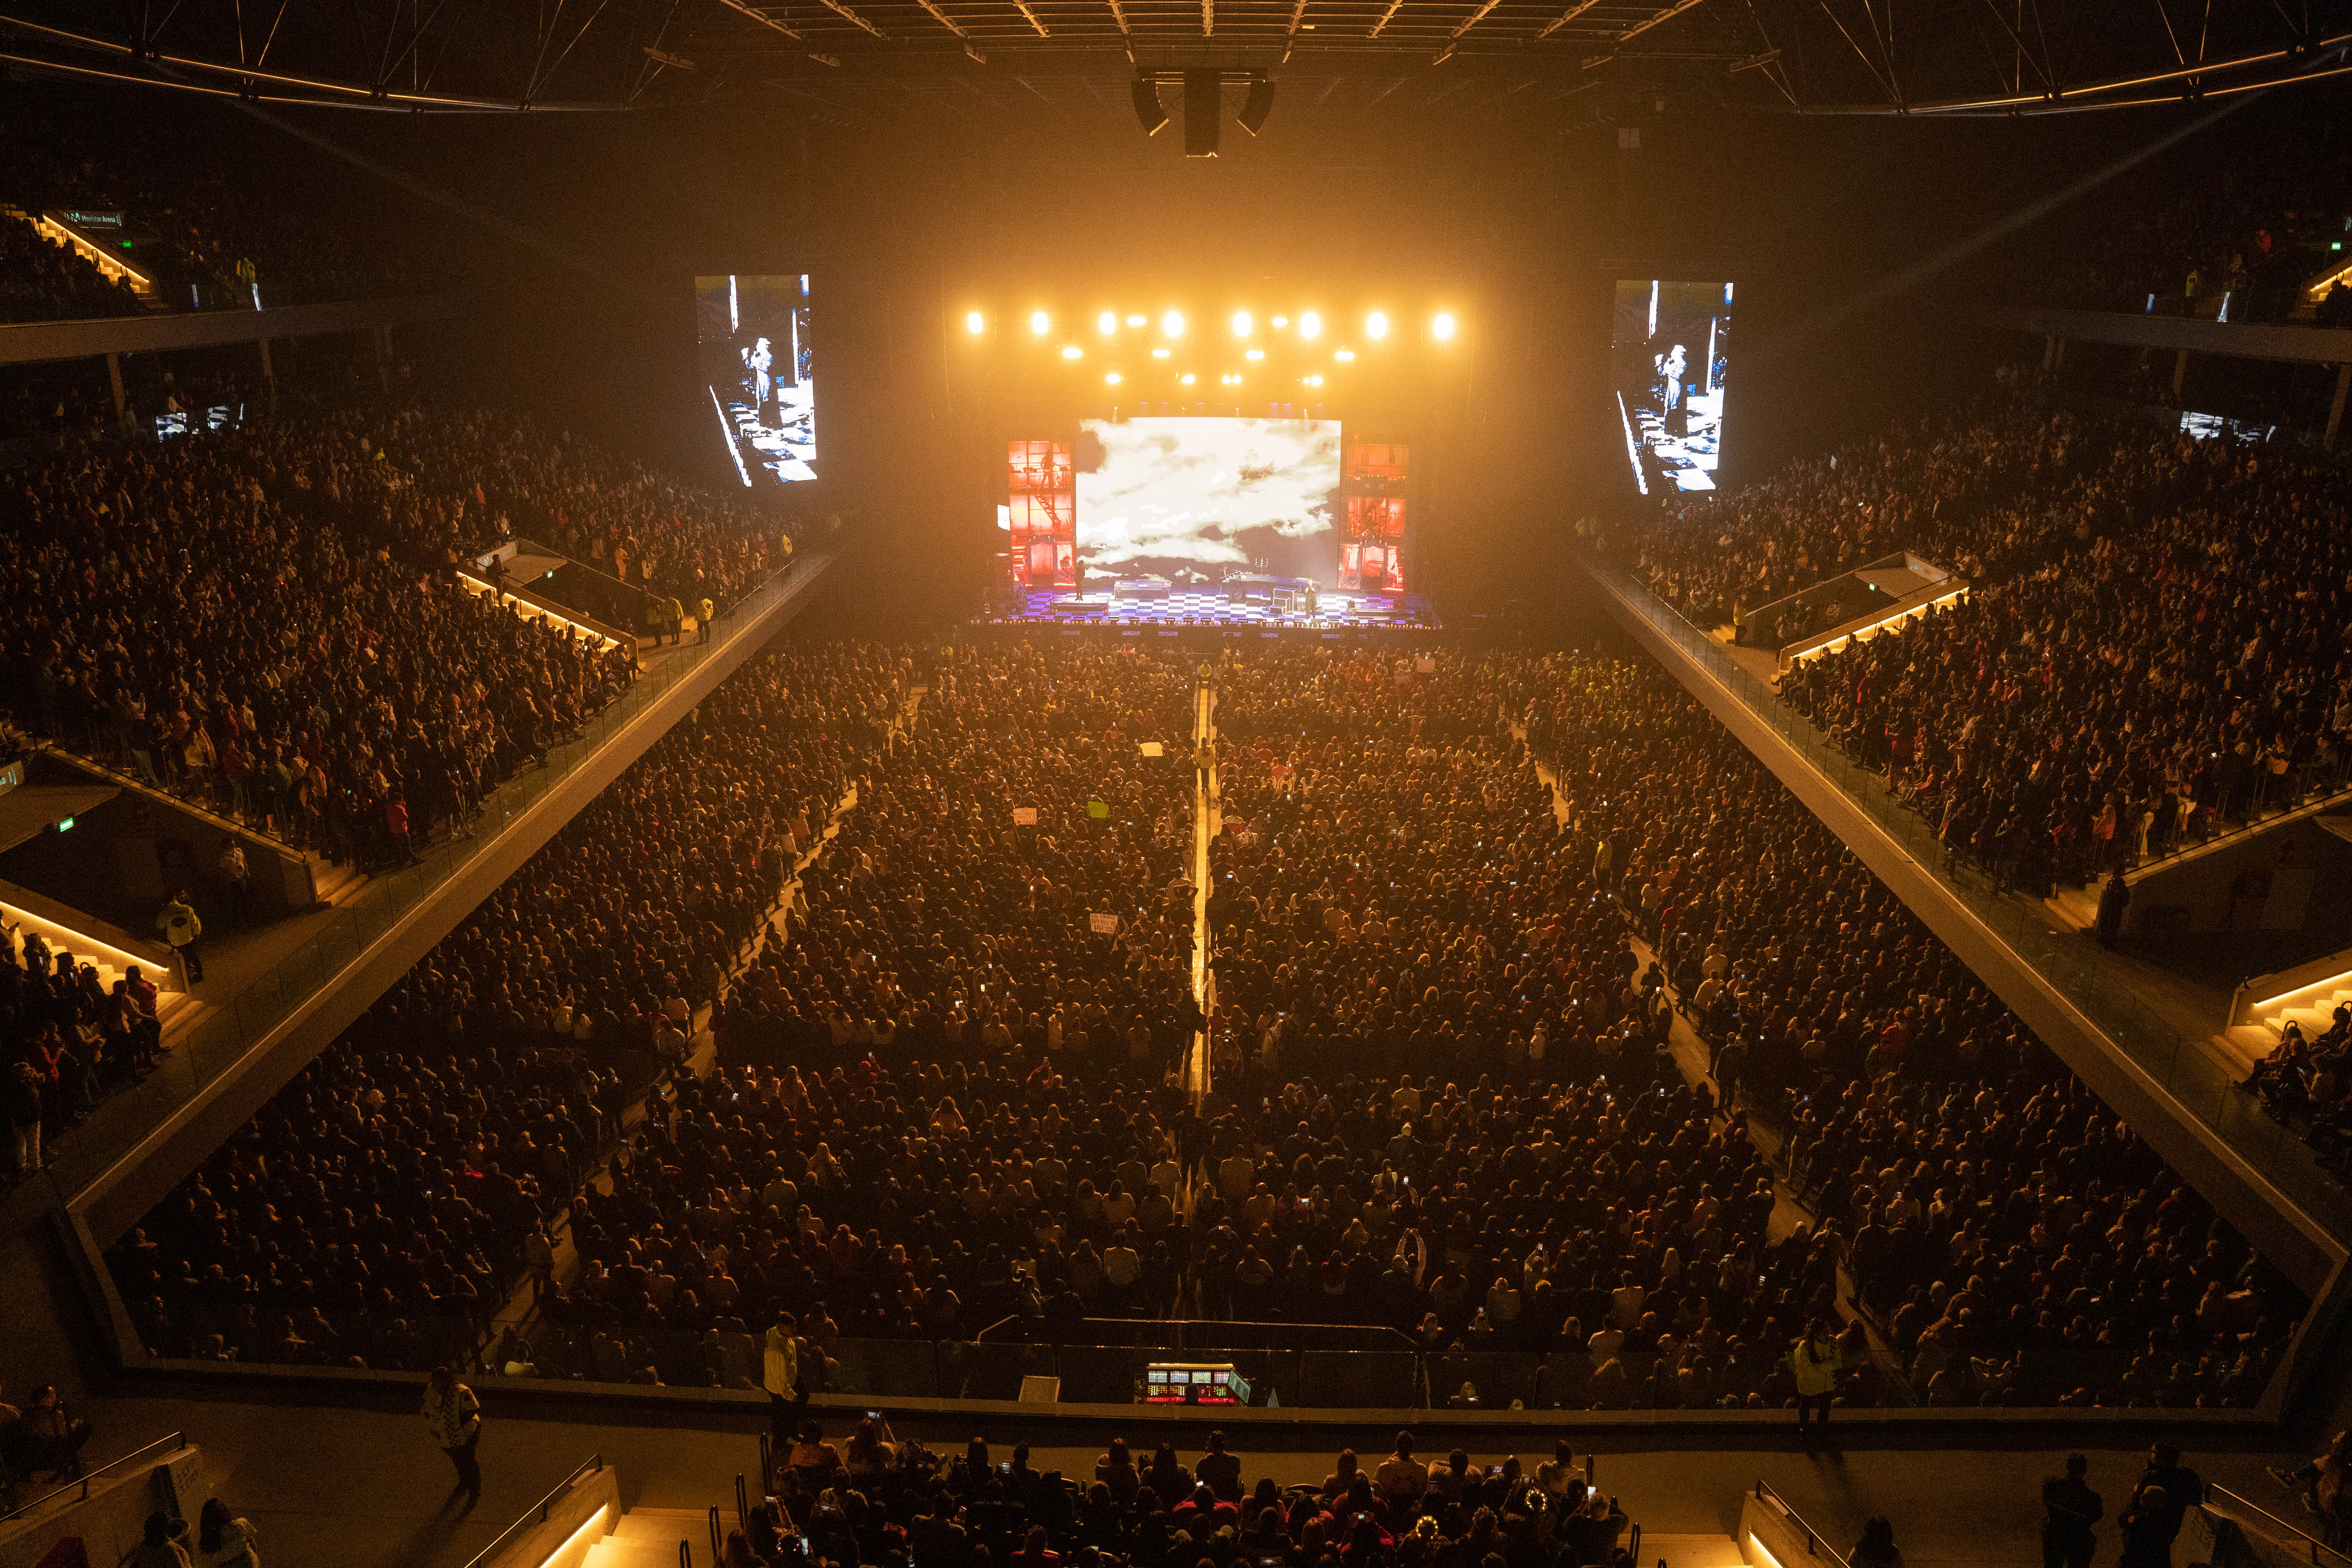 The Movistar Arena Filled With Arjona Fans  